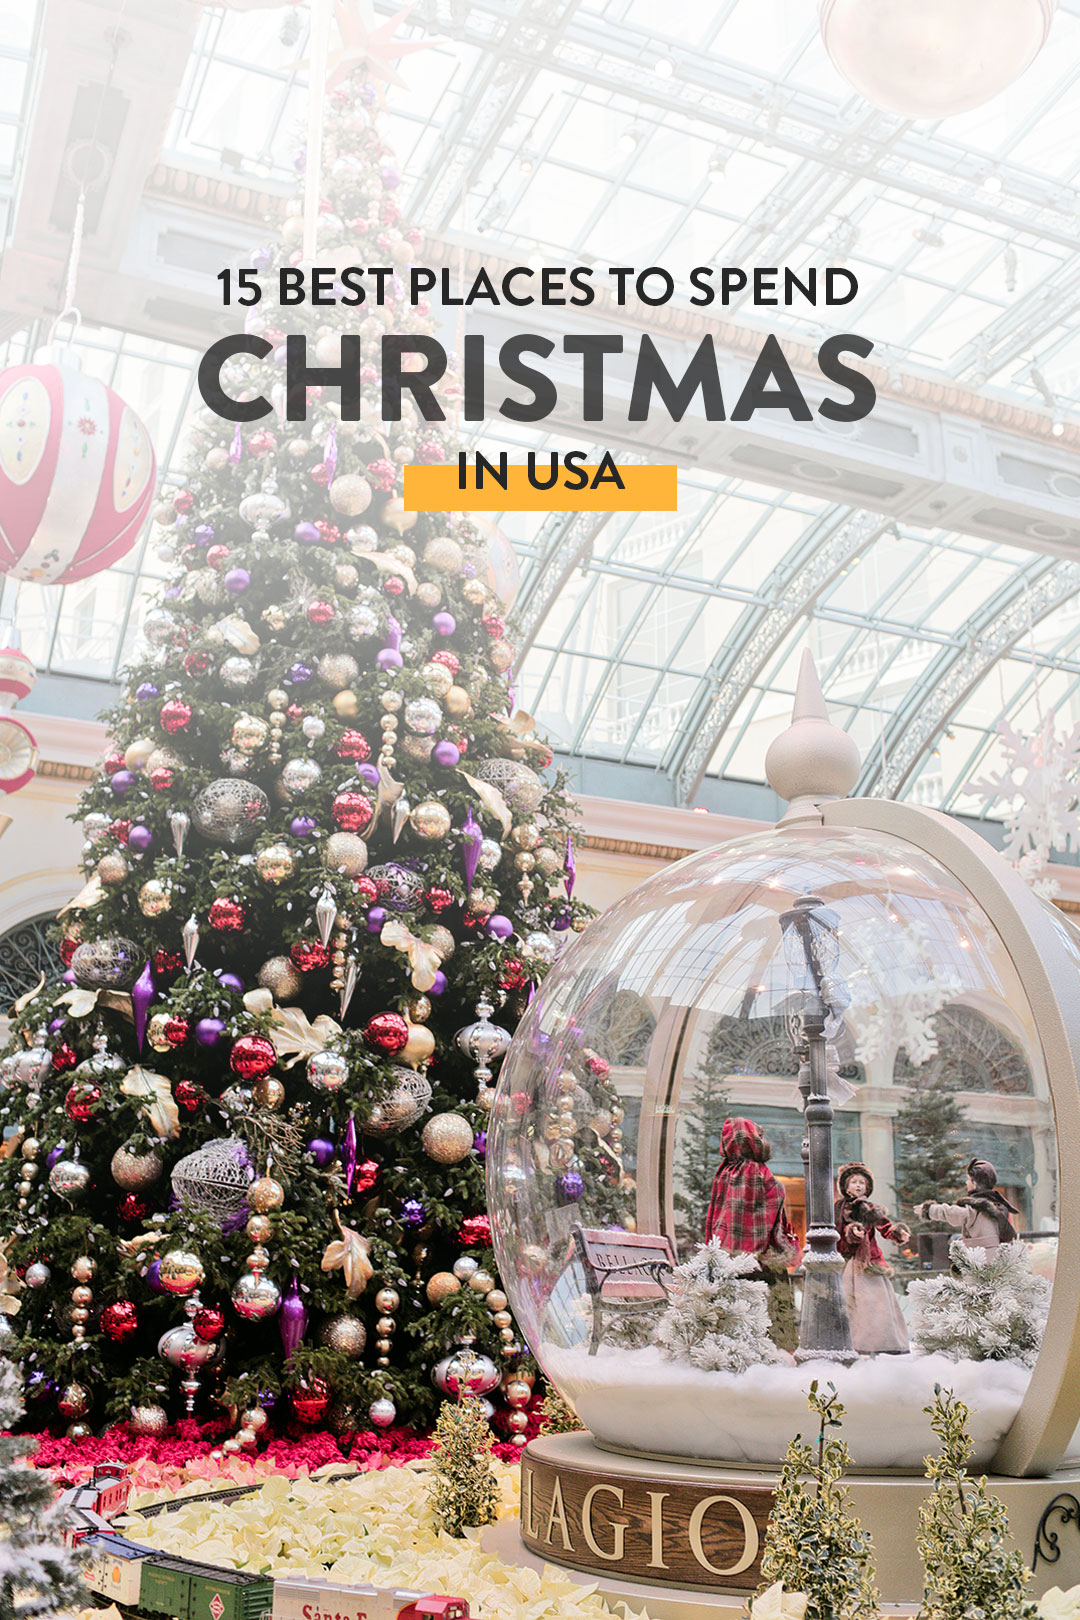 15 Best Places to Spend Christmas in USA